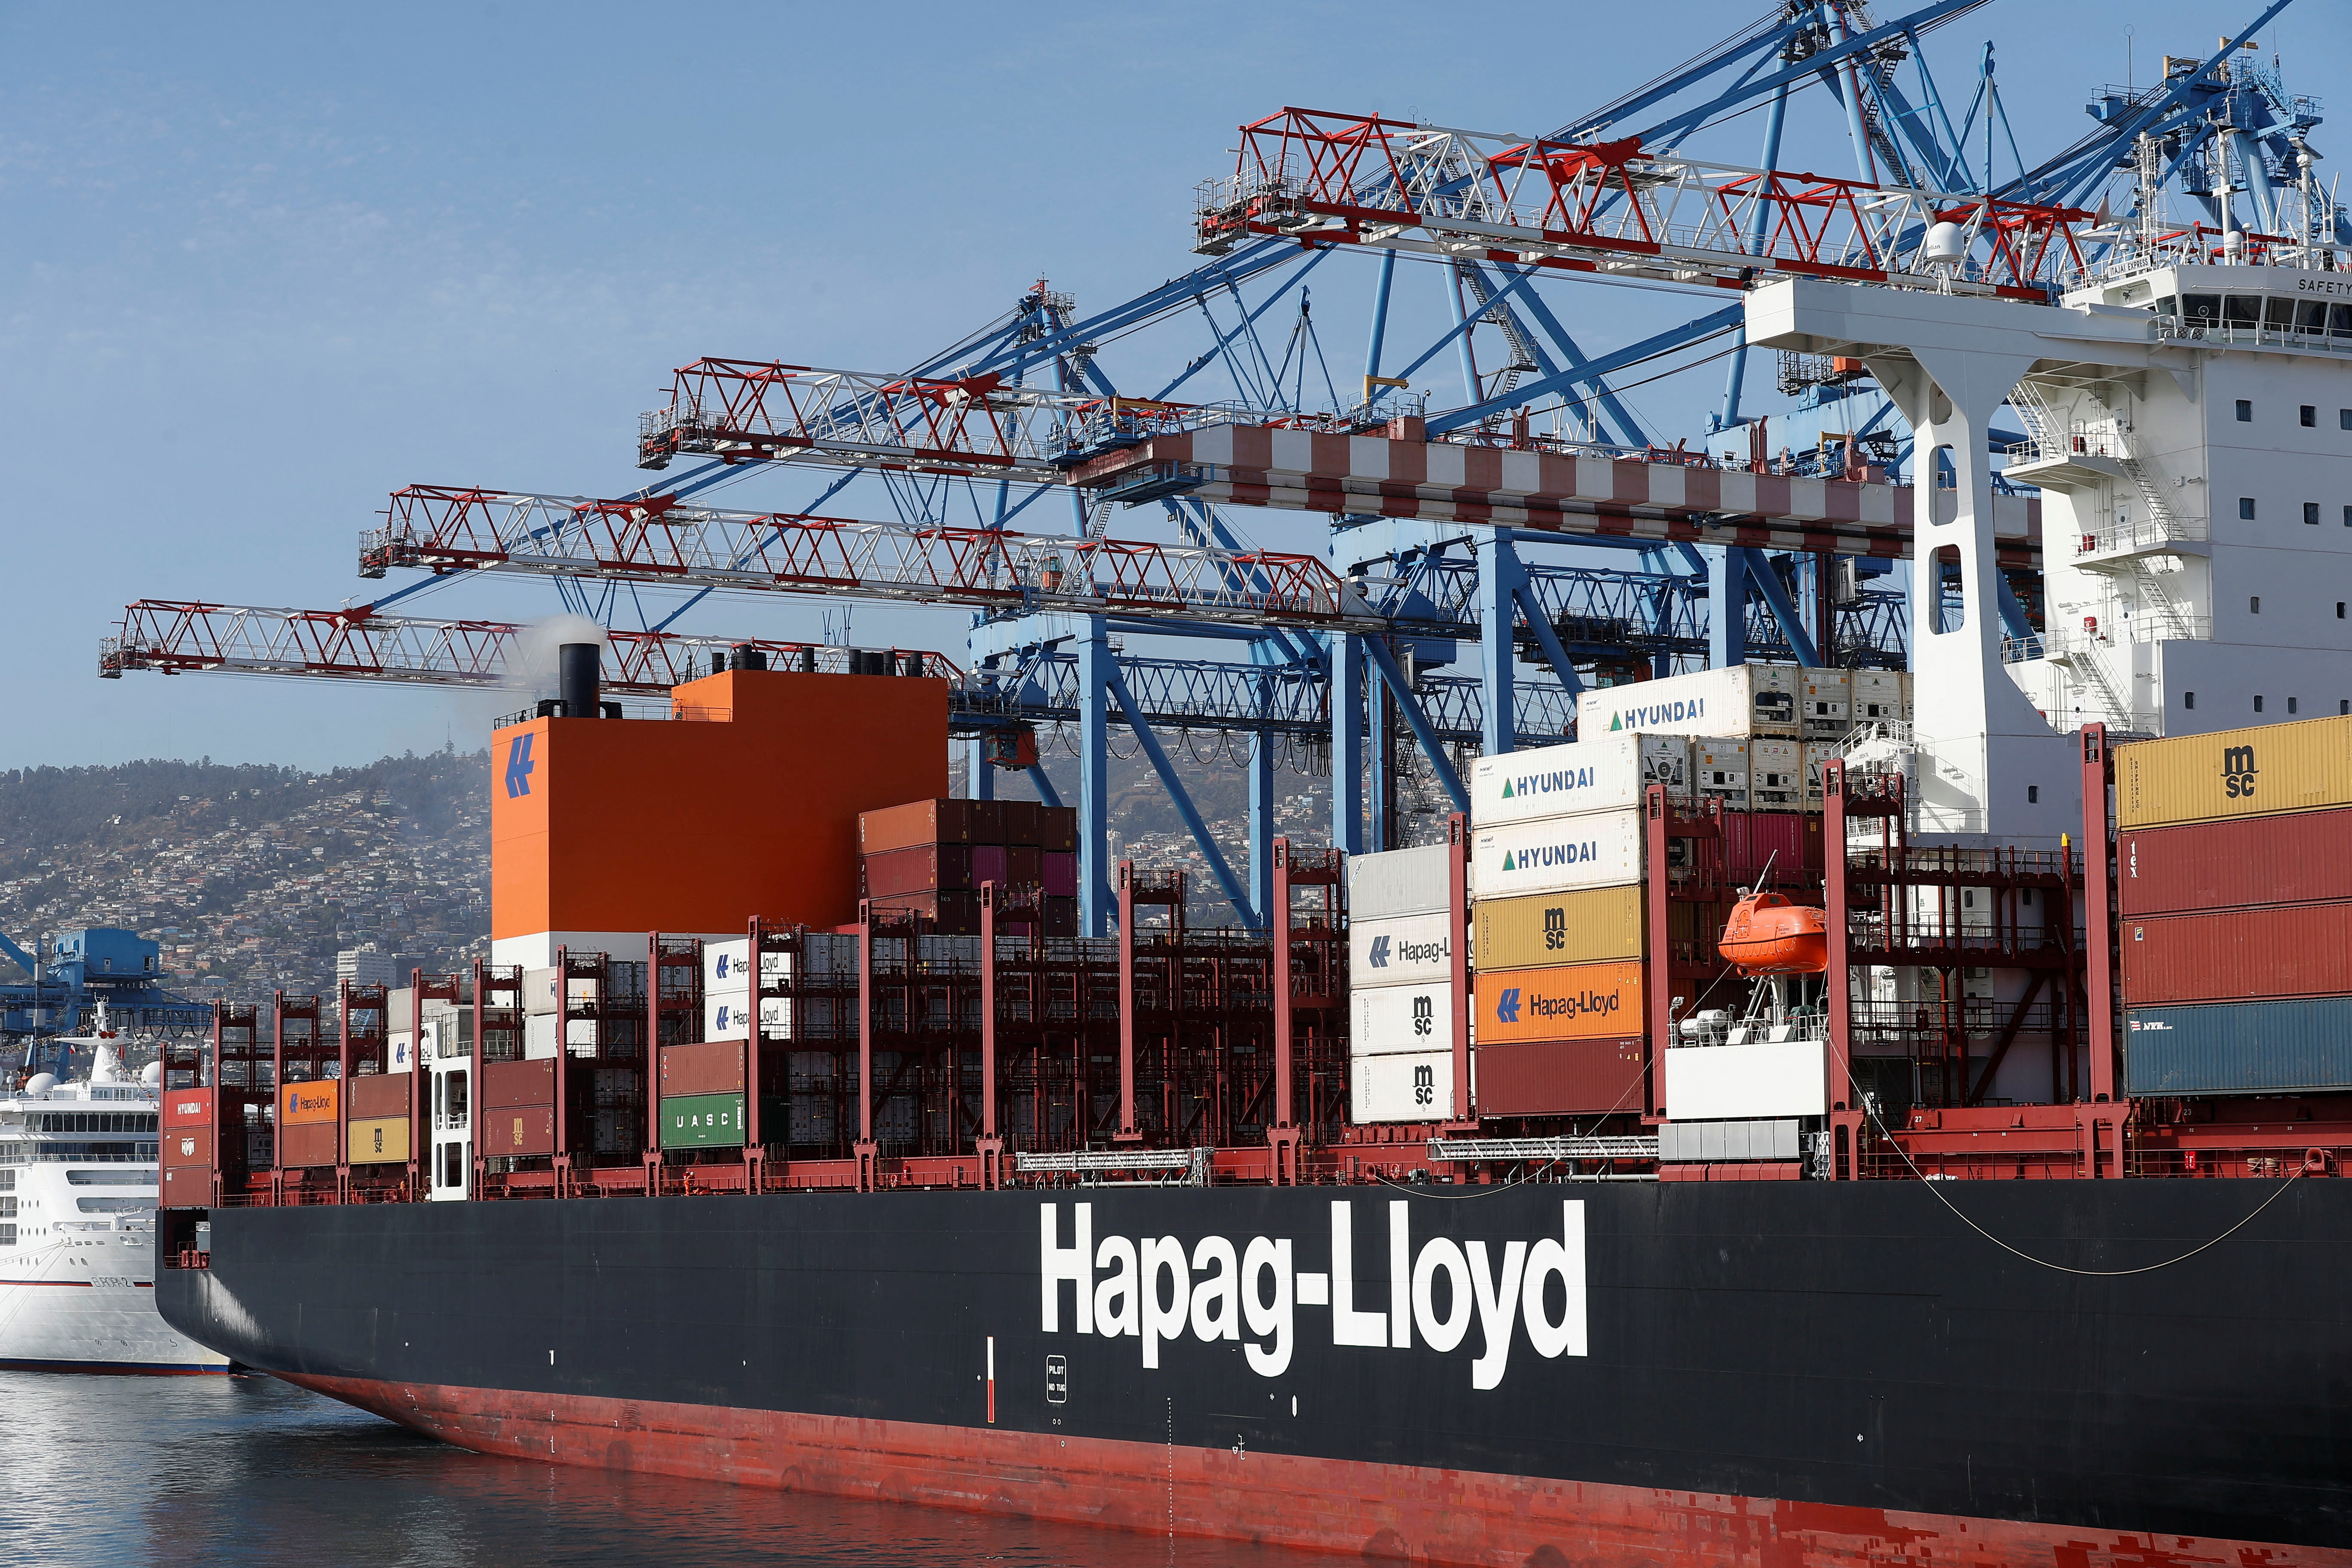 Hapag-Lloyd sign on a container ship is pictured at the Valparaiso port